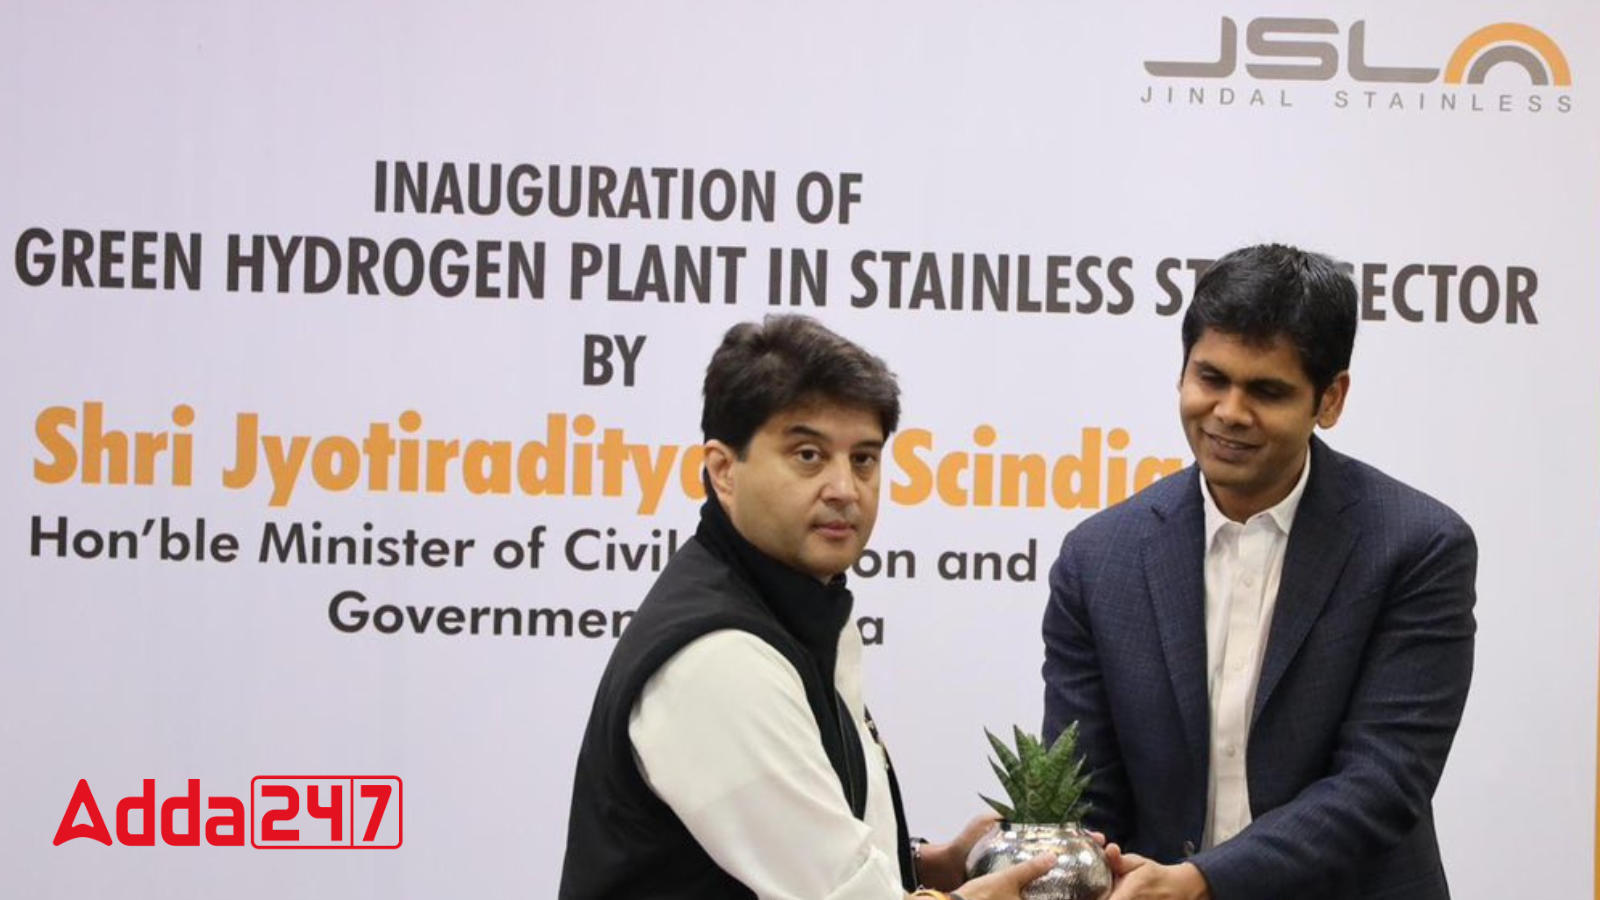 Steel Minister Unveils India's First Green Hydrogen Plant In Stainless Steel Sector_60.1